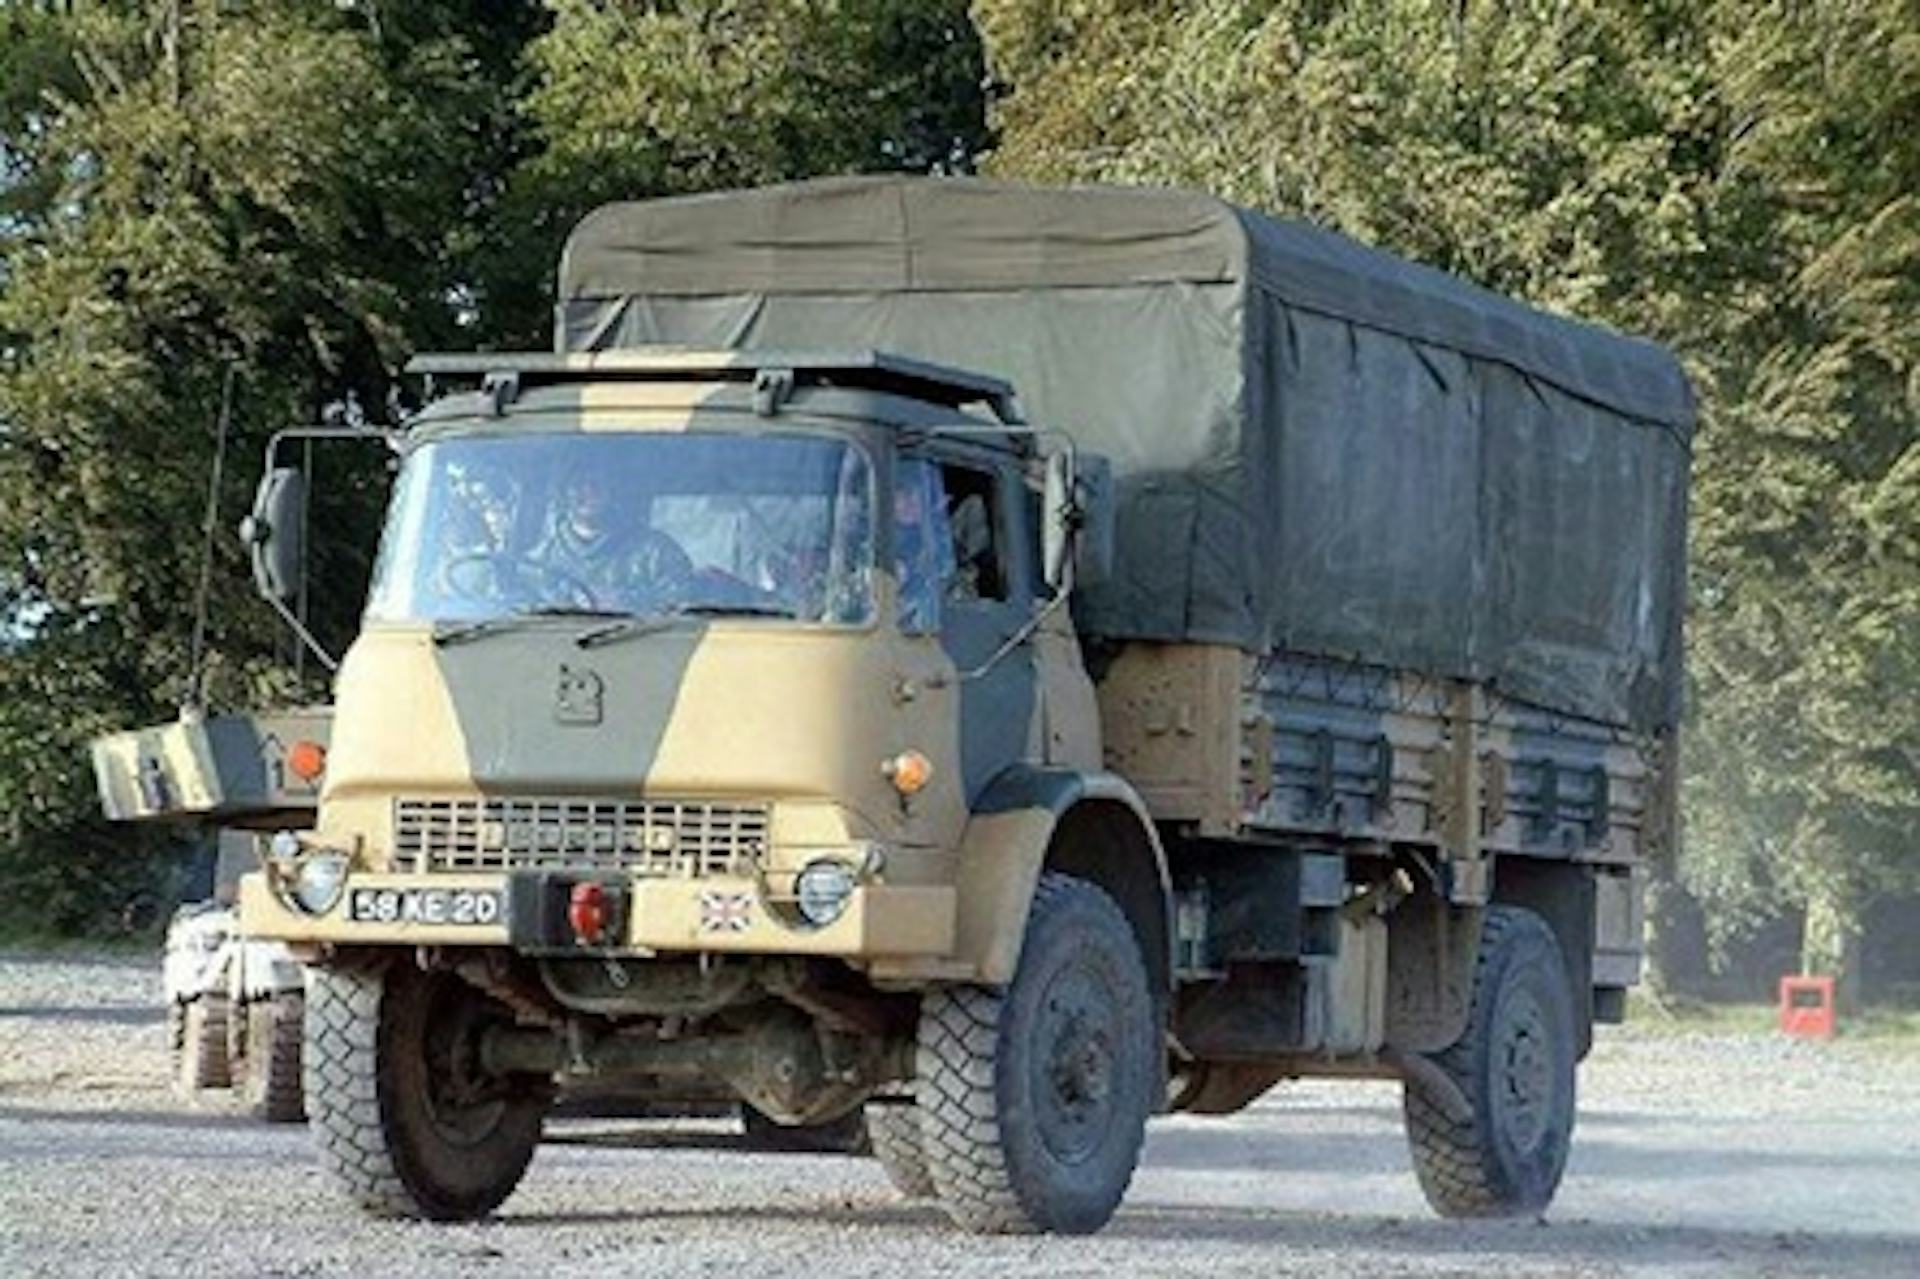 Bedford MJ Army Truck Driving